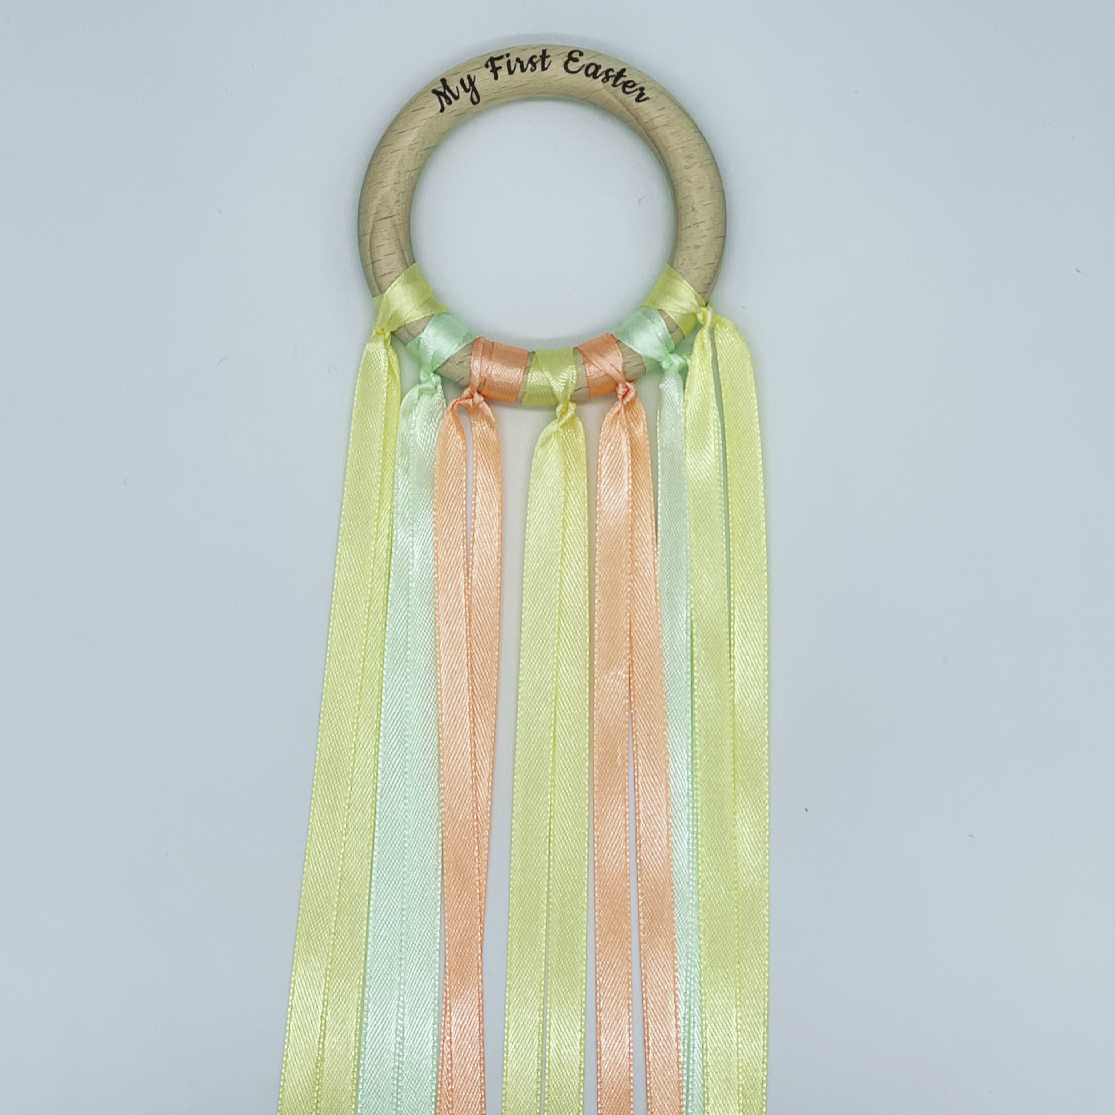 'My First Easter' Sensory Ribbon Ring